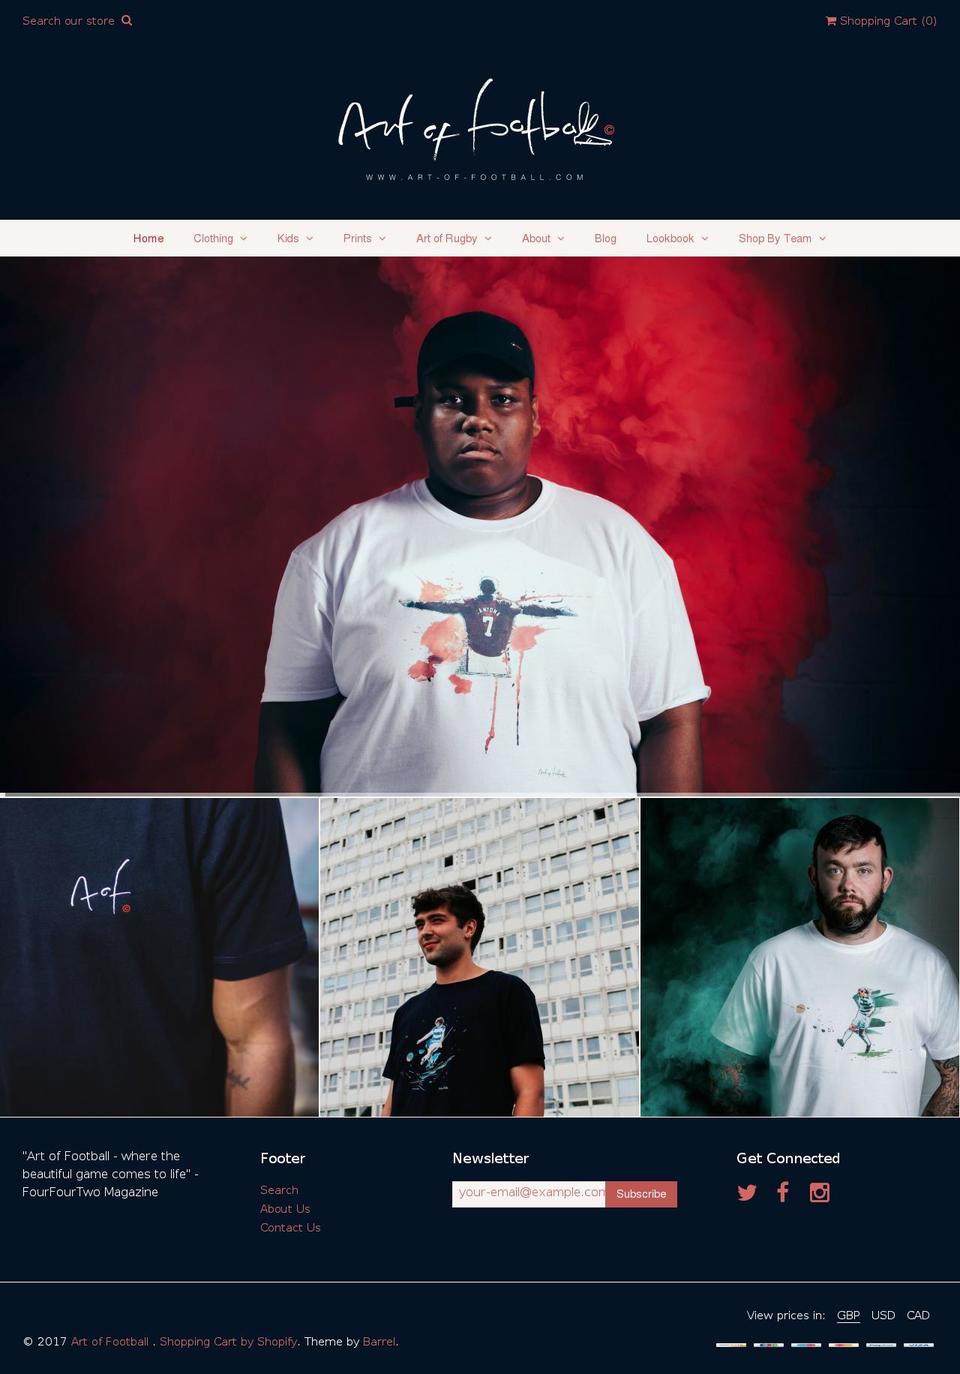 Weekend Shopify theme site example art-of-football.com